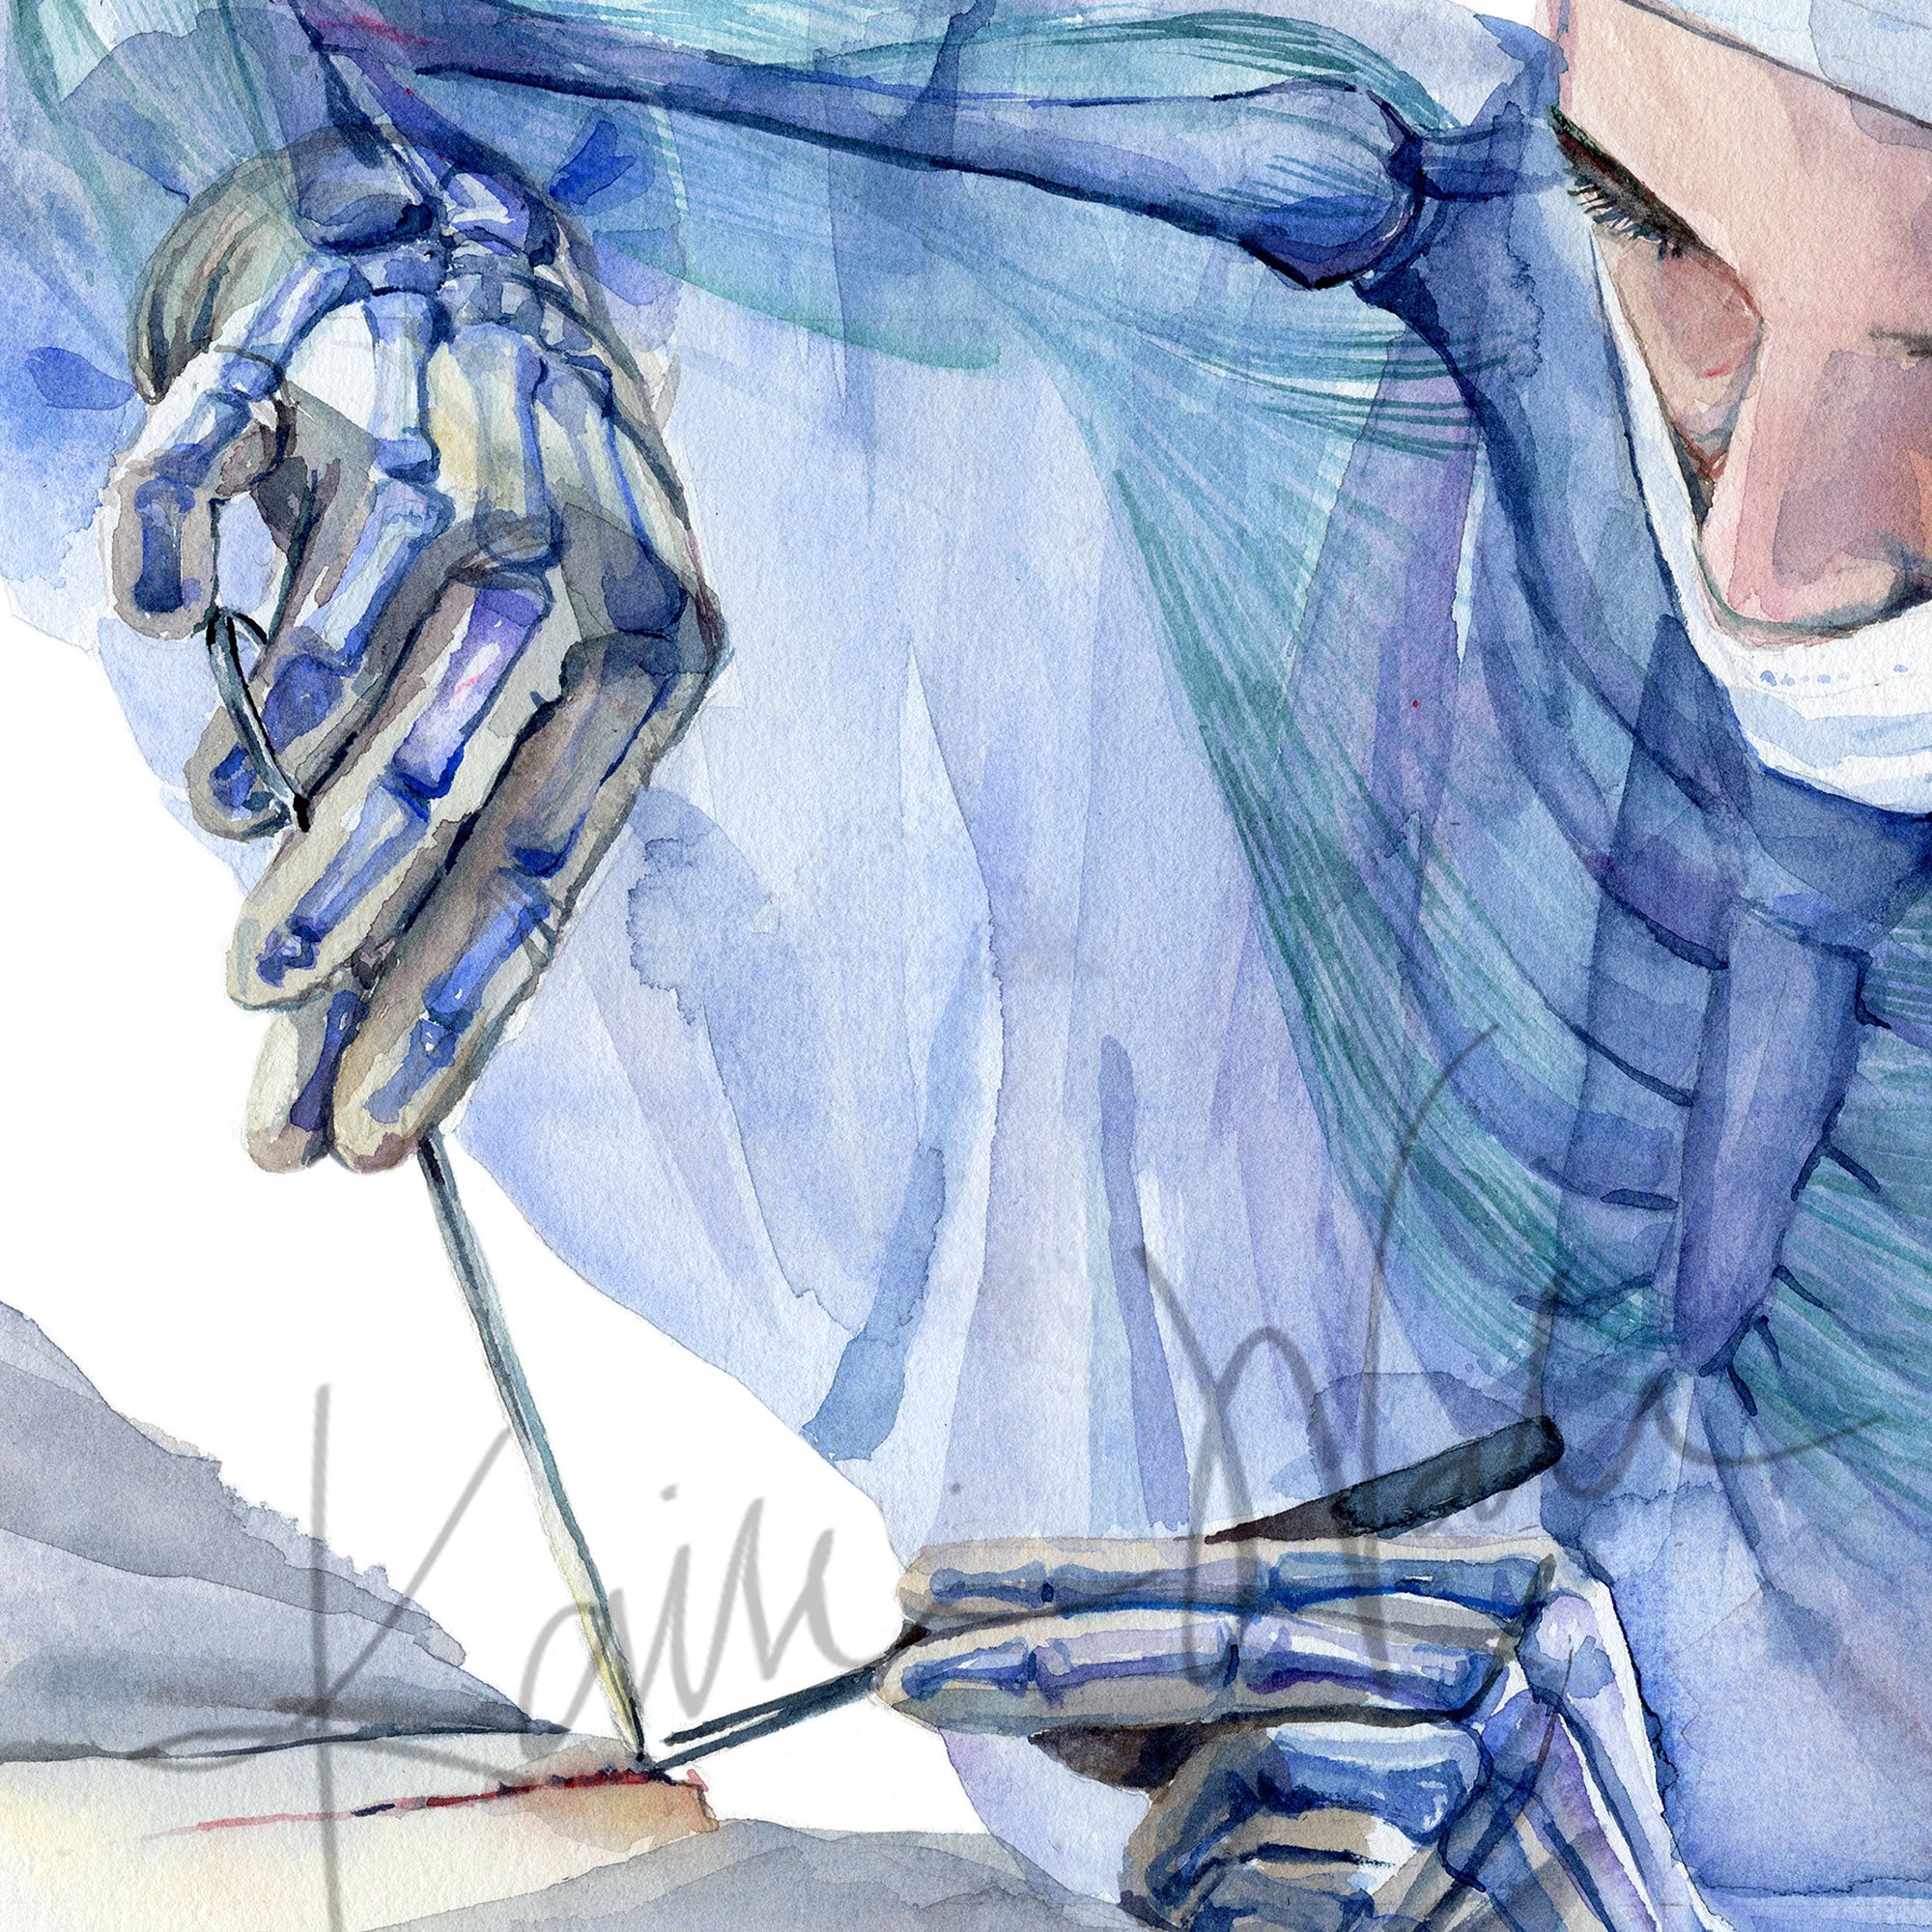 Zoomed in view of a watercolor painting showing the ergonomics of a surgeon at work.